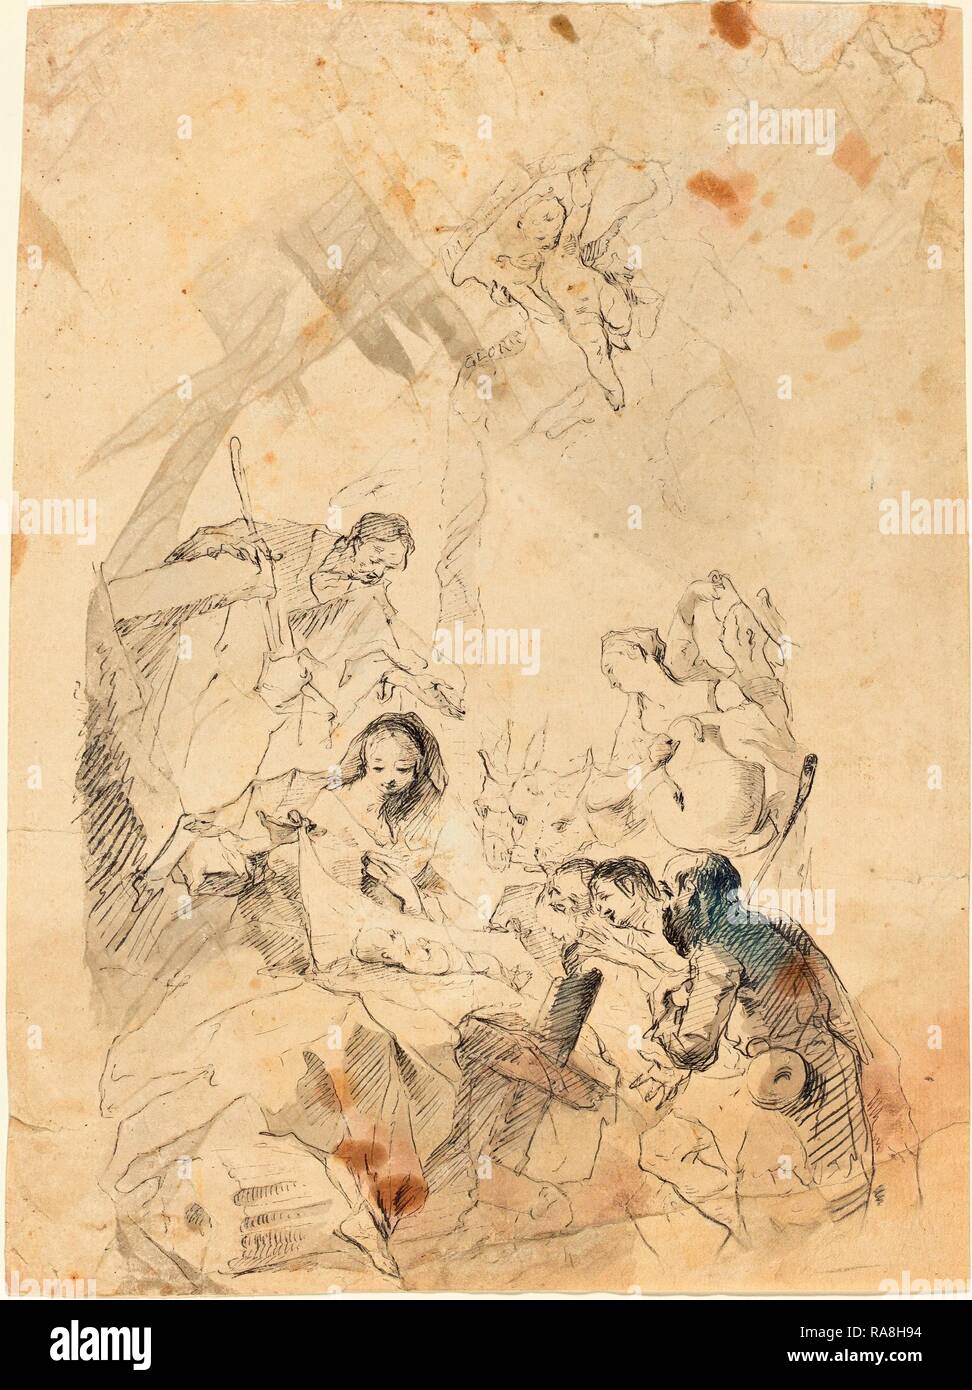 Franz Anton Maulbertsch (Austrian, 1724 - 1796), The Adoration of the Shepherds, 1757, pen and black ink with gray reimagined Stock Photo